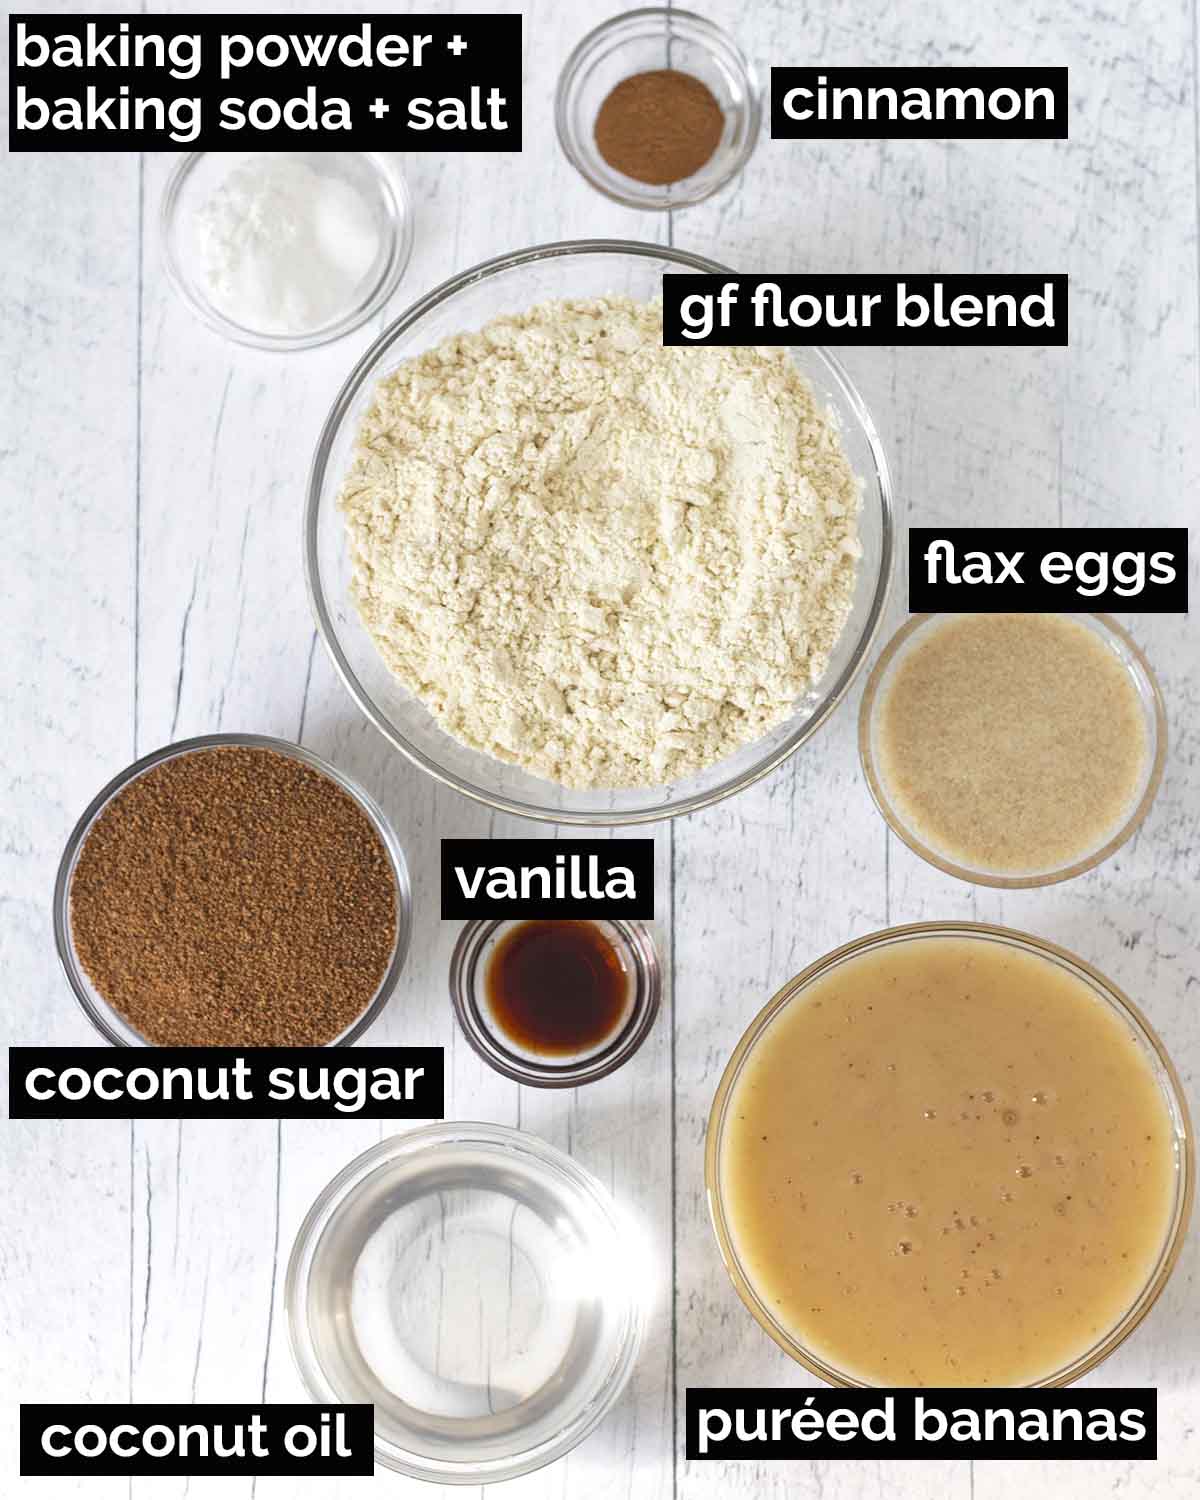 An overhead shot showing all the ingredients needed to make gf banana bread.